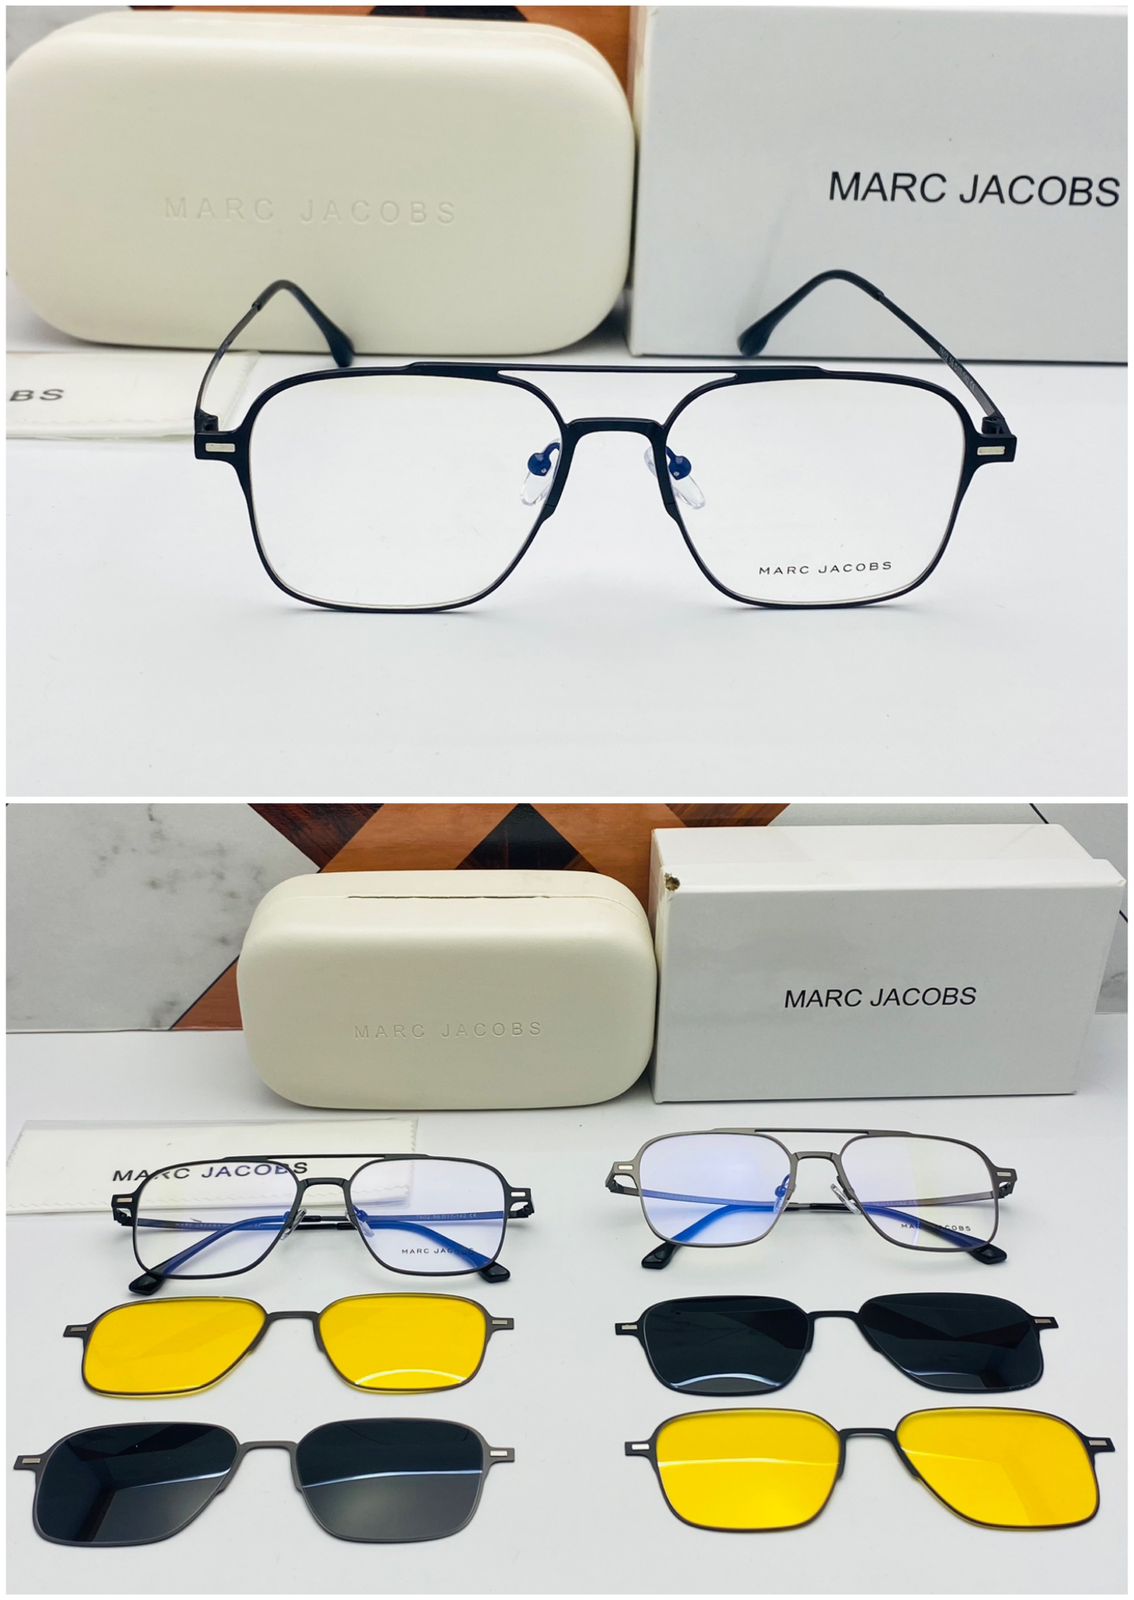 Marc jacobs attachment glassese